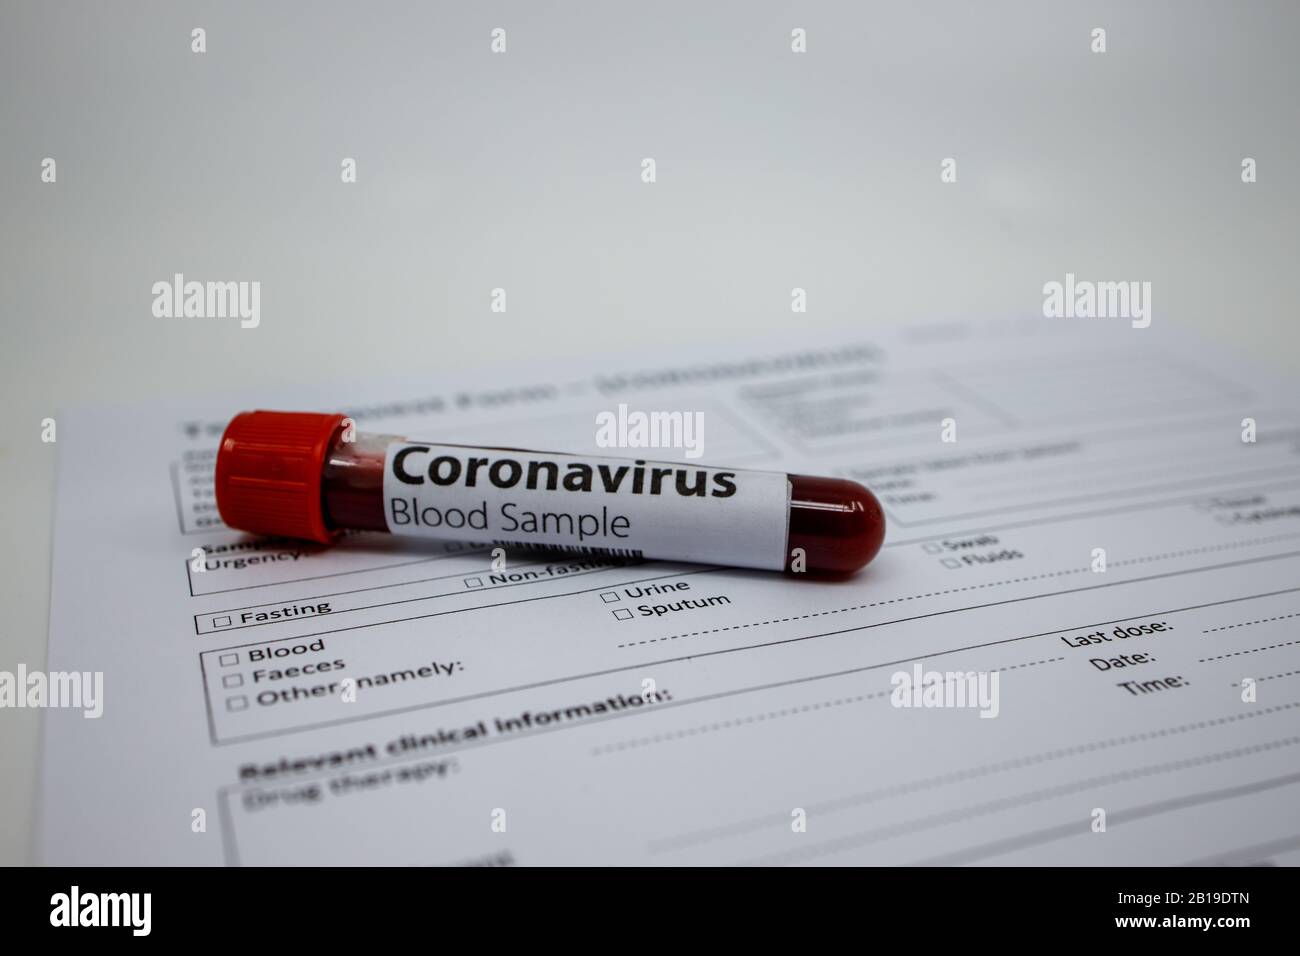 Blood sample for the new rapidly spreading Coronavirus that originated in Wuhan, China. Test tube on an empty blood test request form for covid-19 Stock Photo